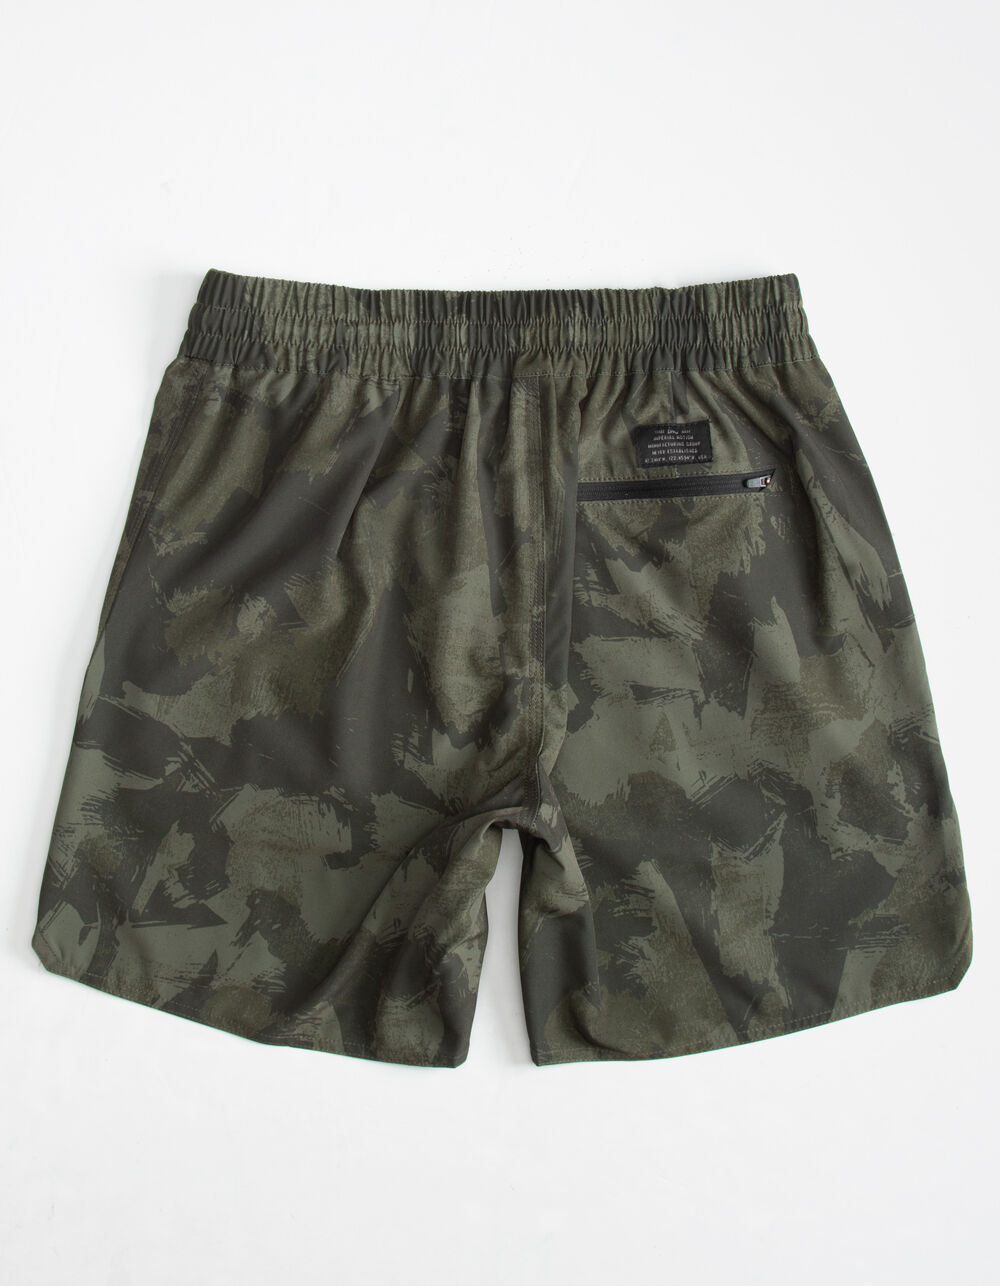 IMPERIAL MOTION Minimalist Mens Volley Shorts - MILIT | Tillys